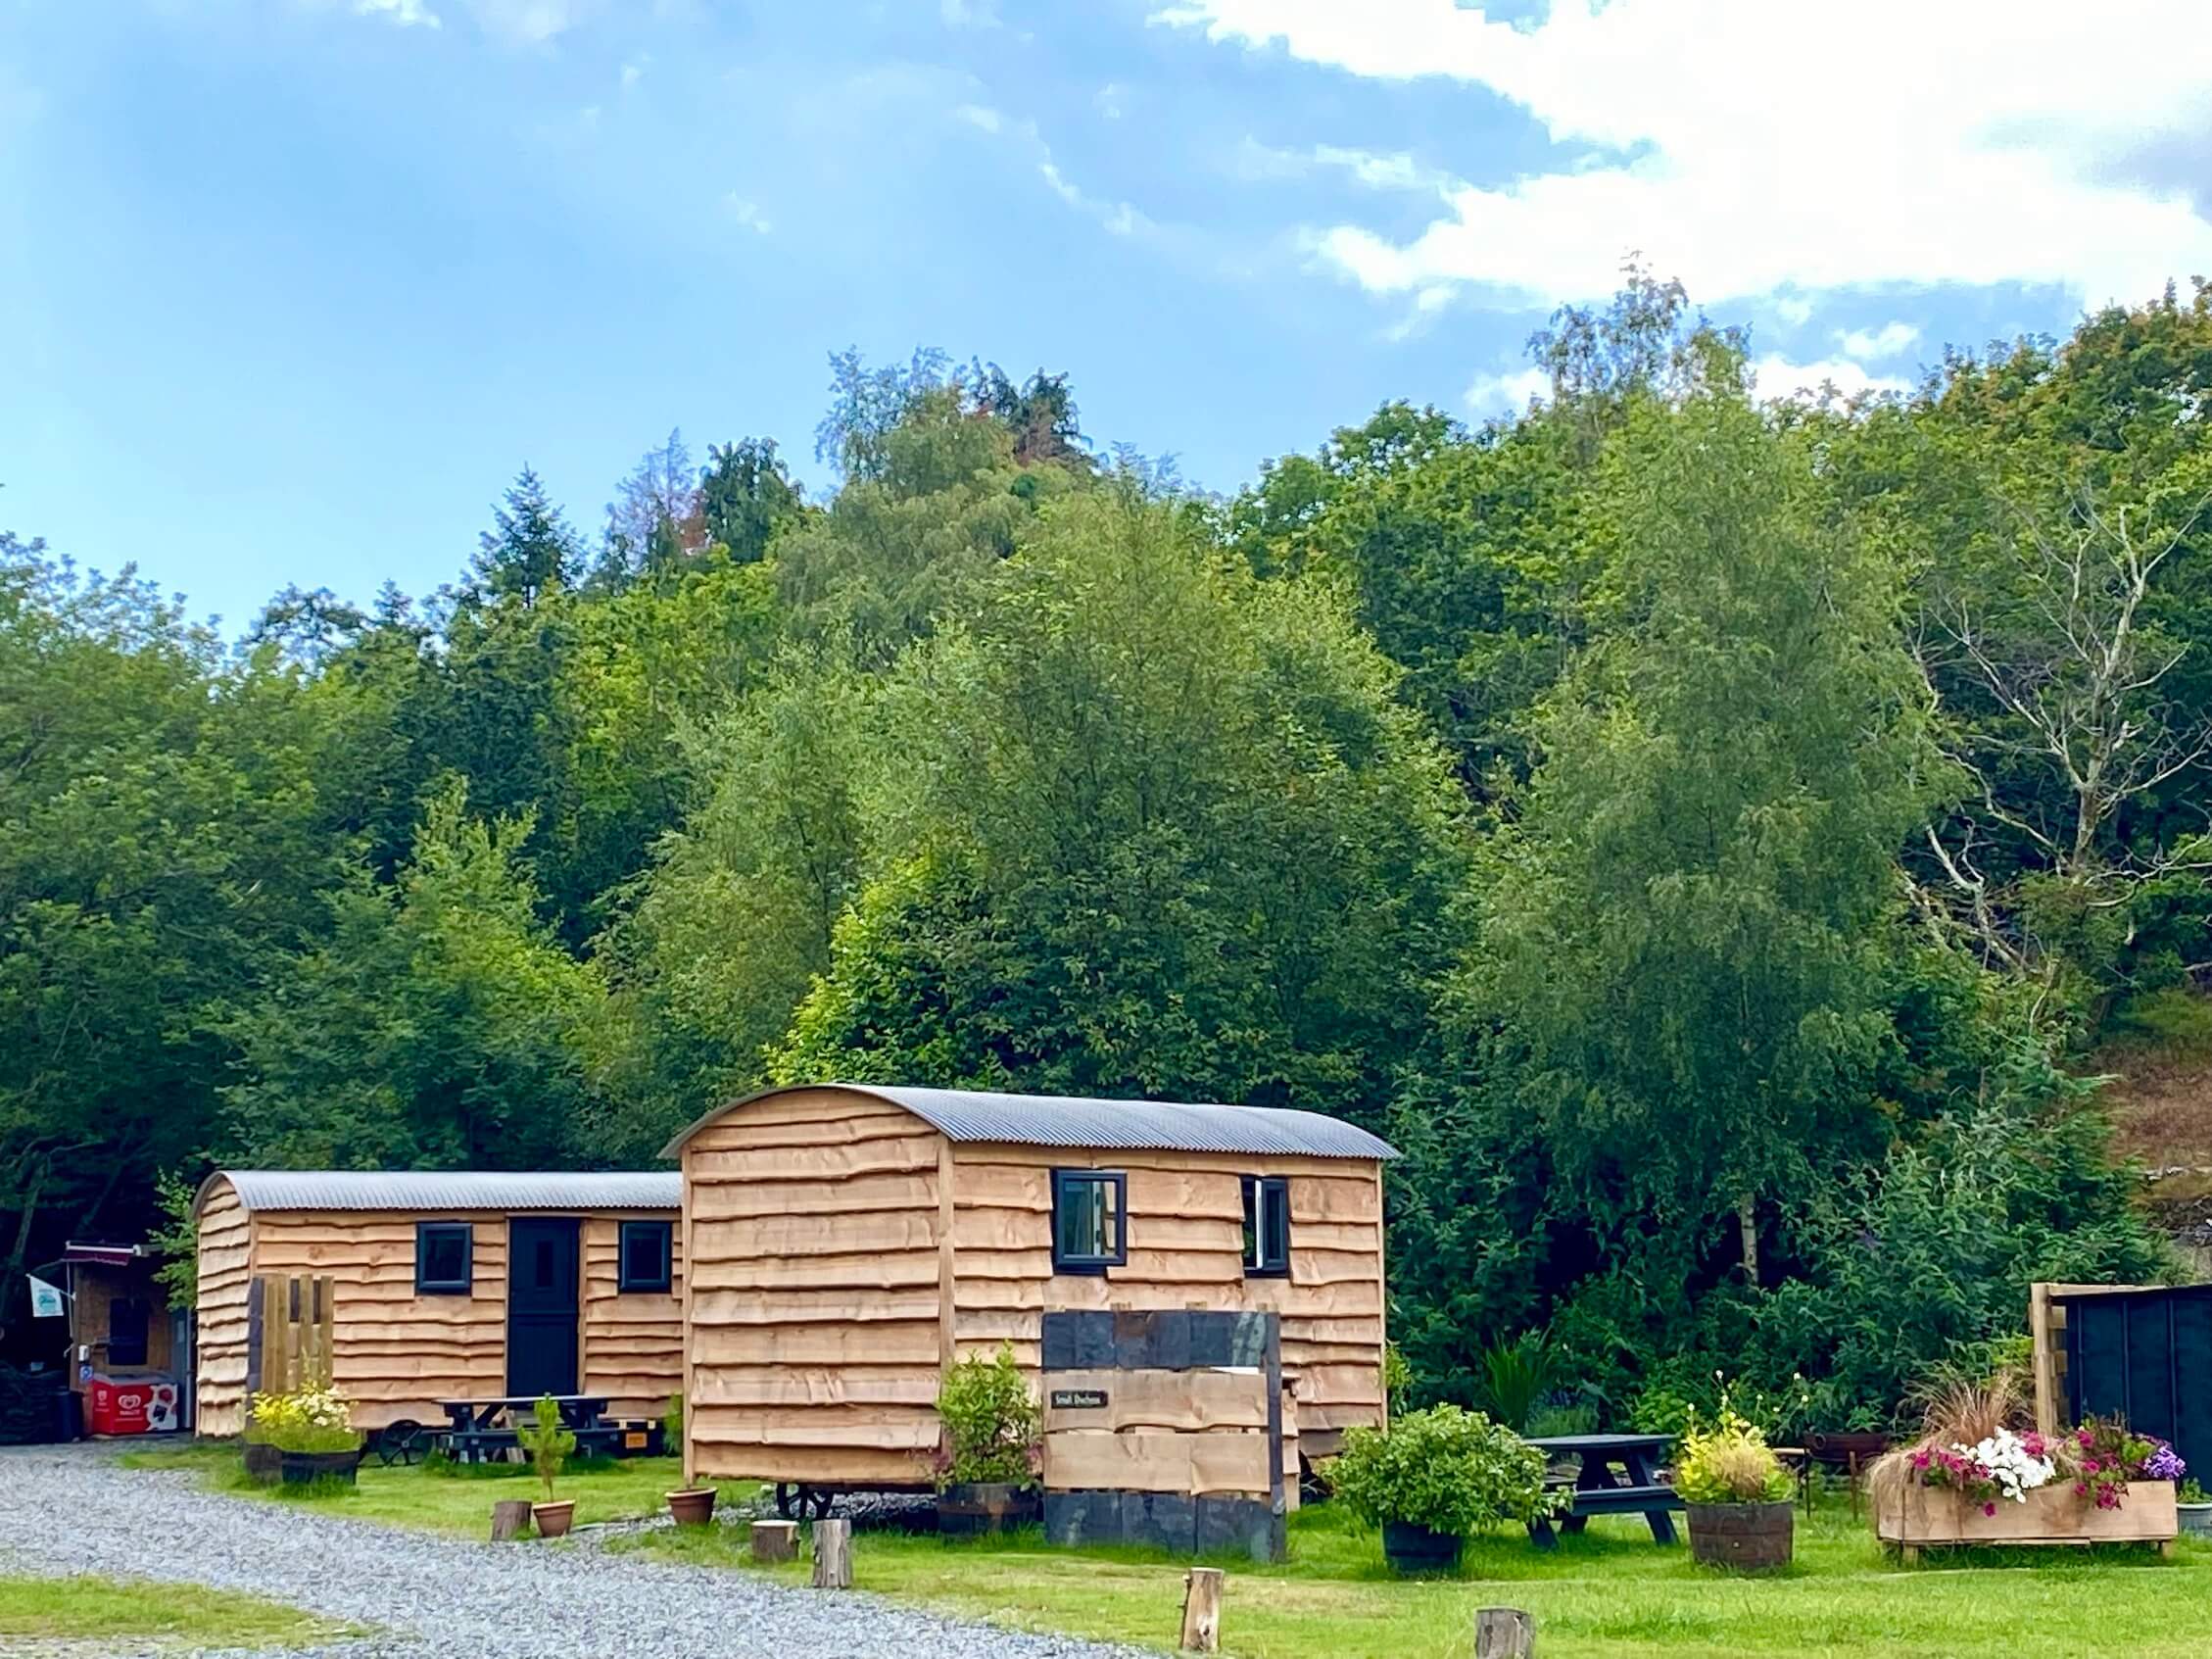 Campsite In Snowdonia Wales, Snowdonia Accommodation, Glamping North Wales, Self catering Accommodation